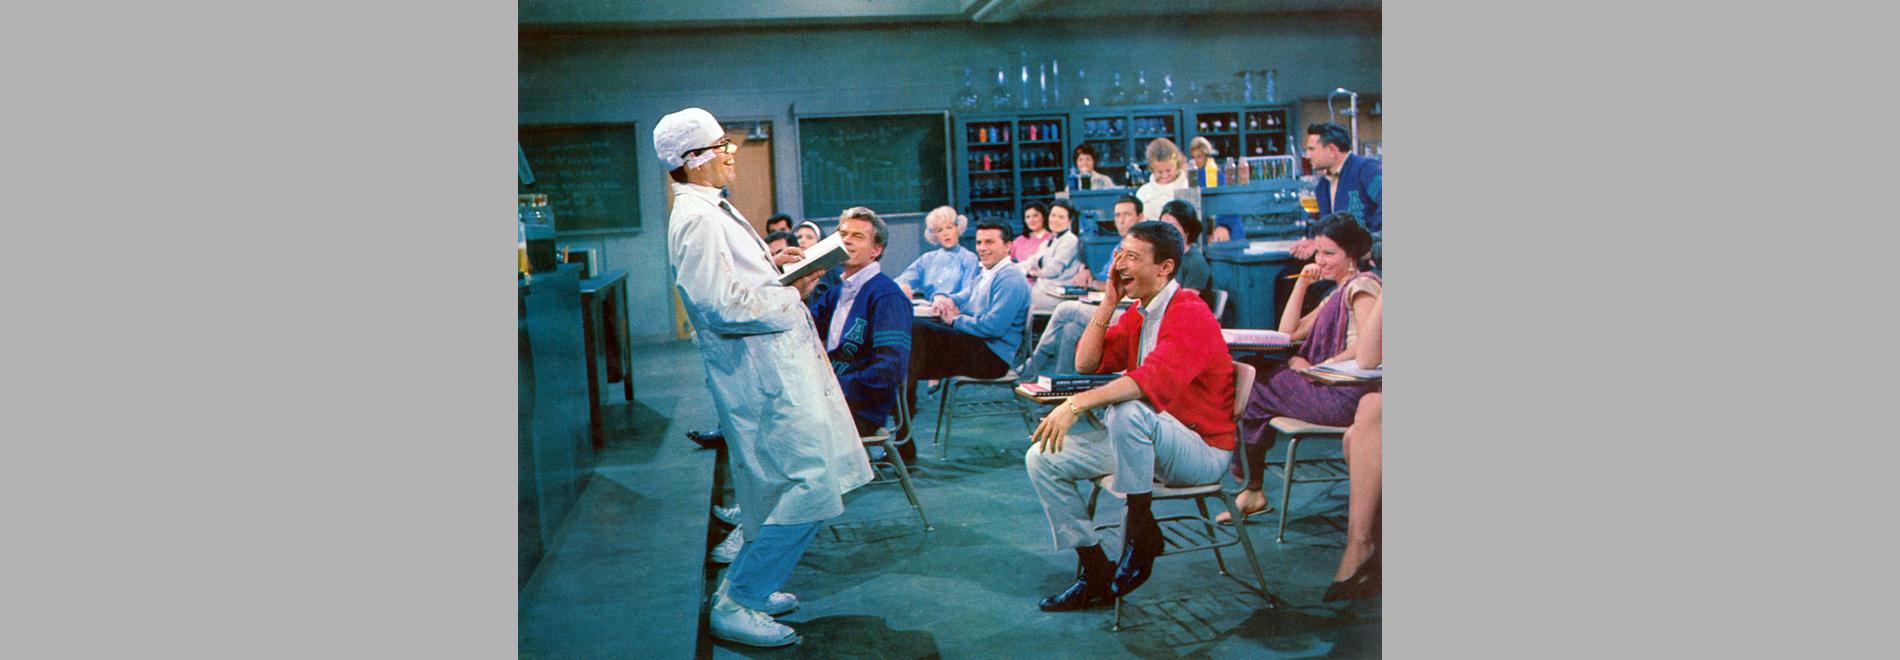 The Nutty Professor (Jerry Lewis, 1963)